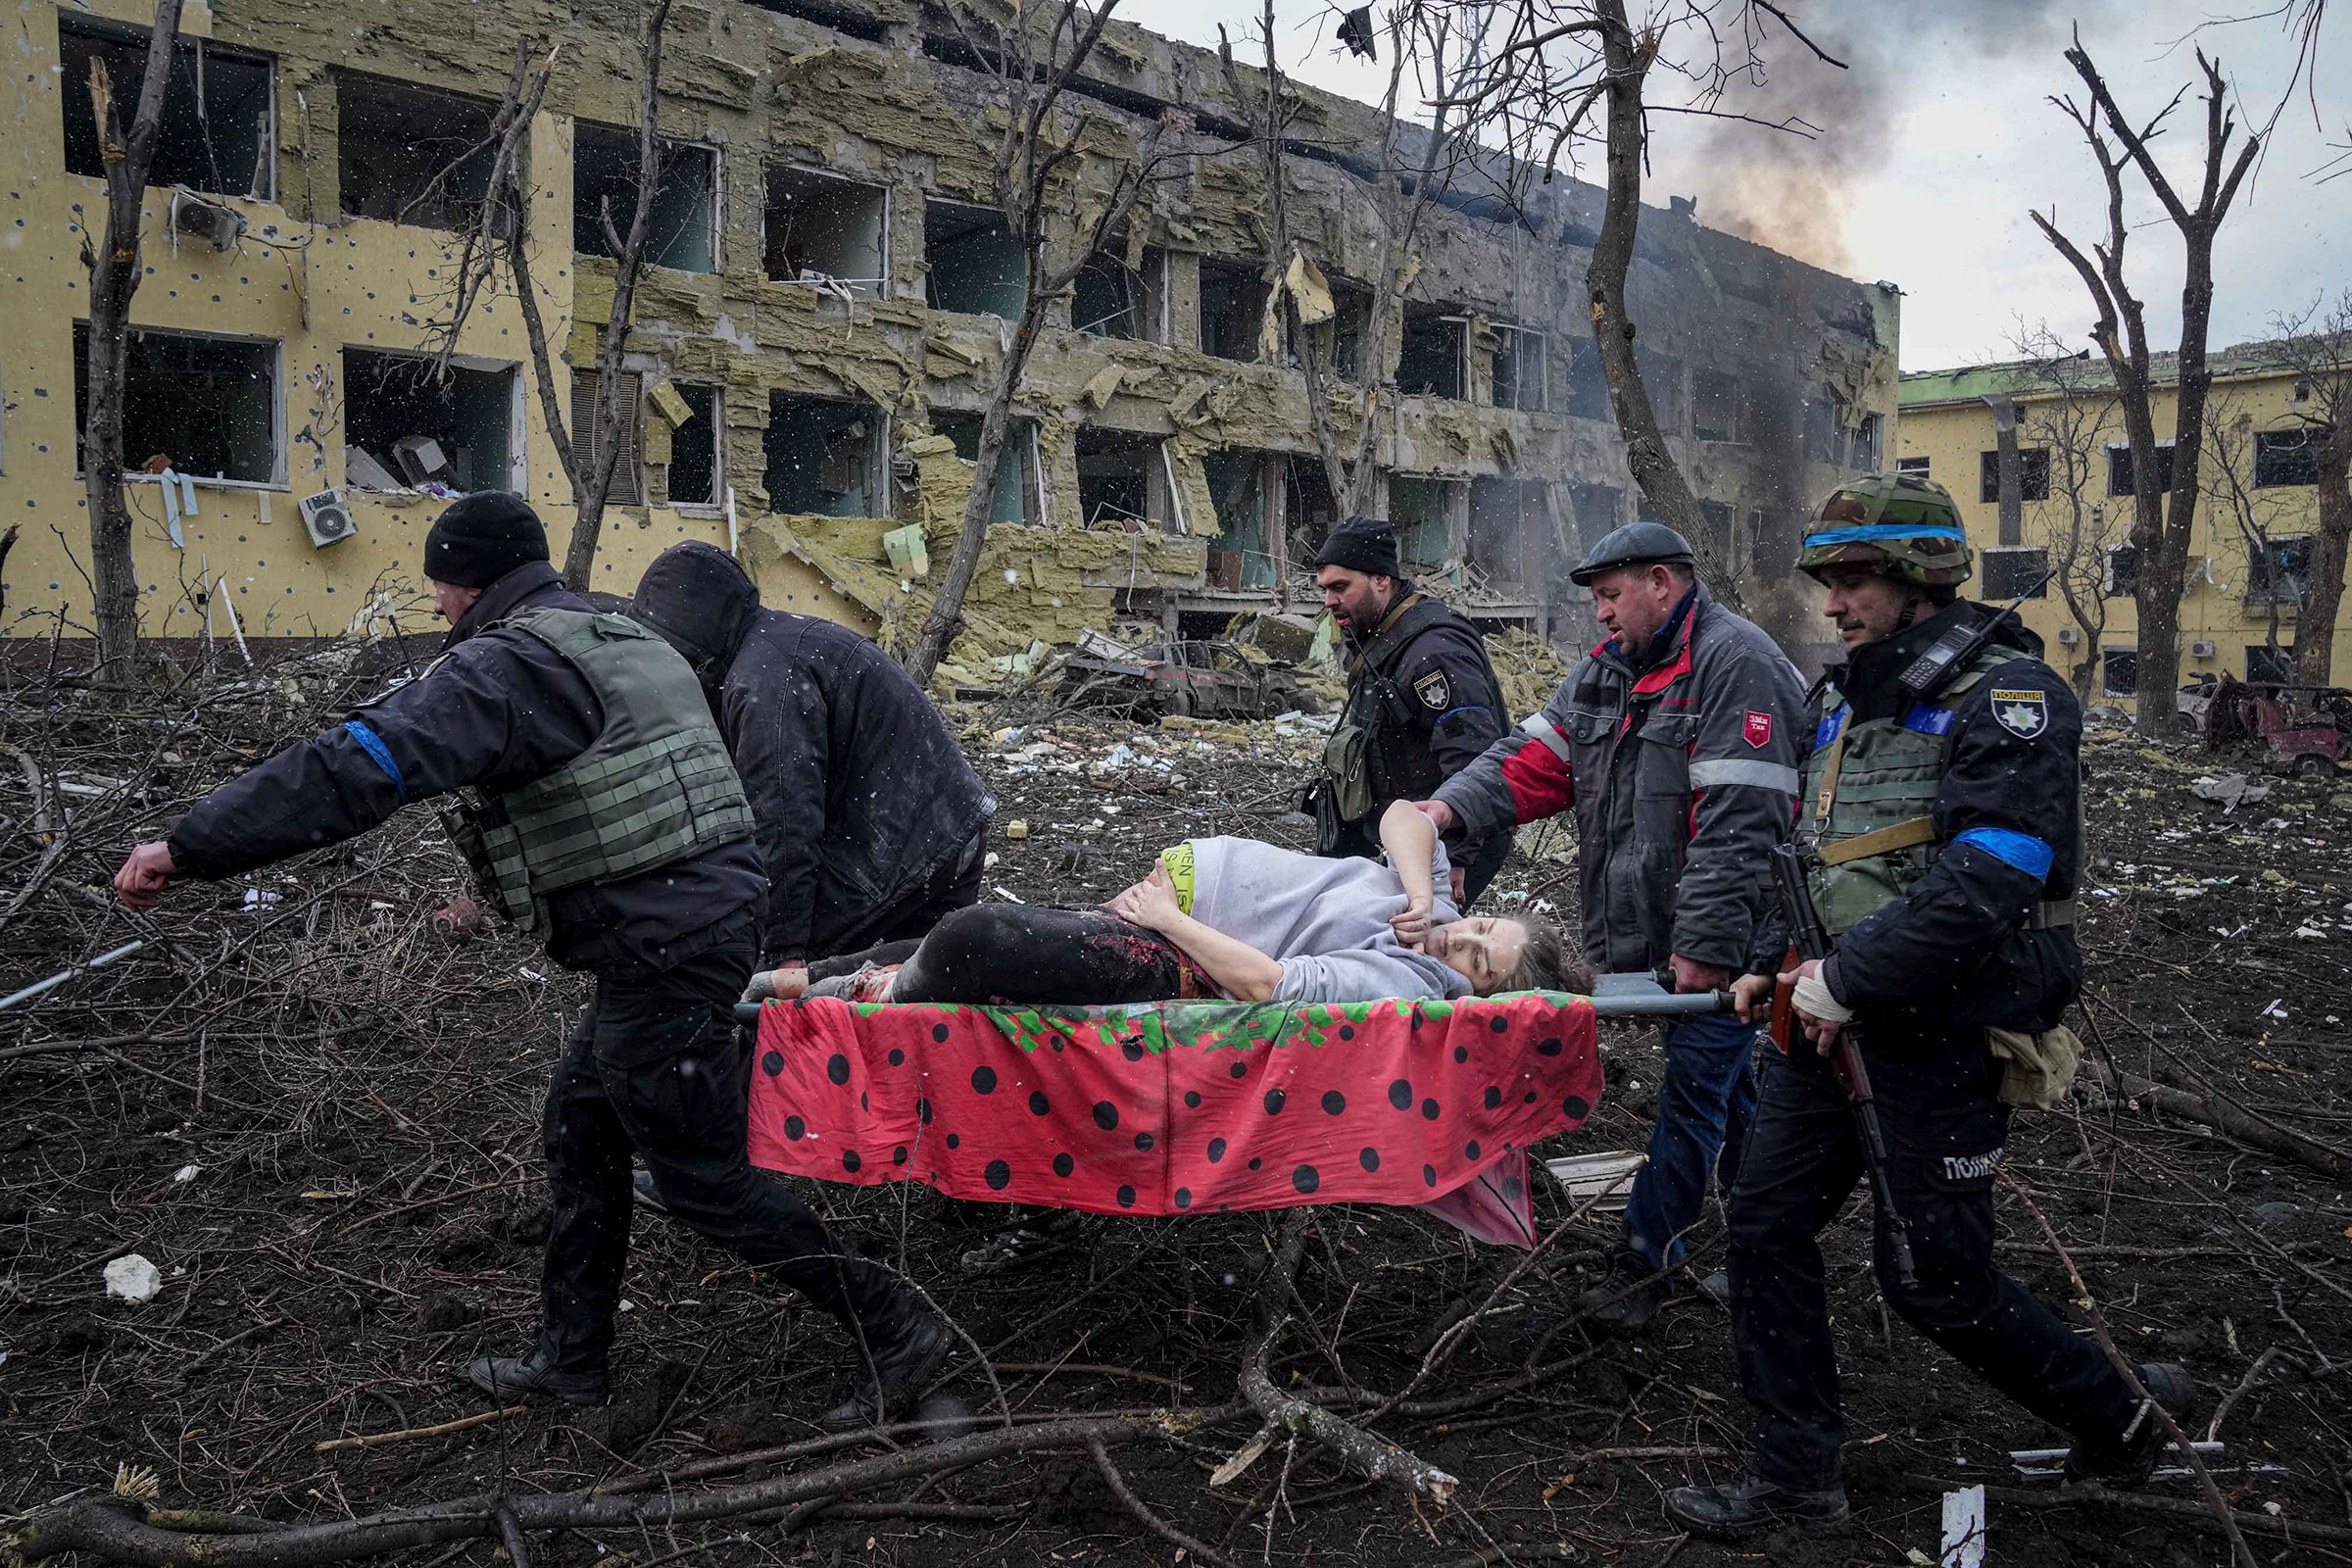 Ukrainian emergency employees and volunteers carry an injured pregnant woman from a damaged maternity hospital in Mariupol on March 9. (Evgeniy Maloletka—AP)